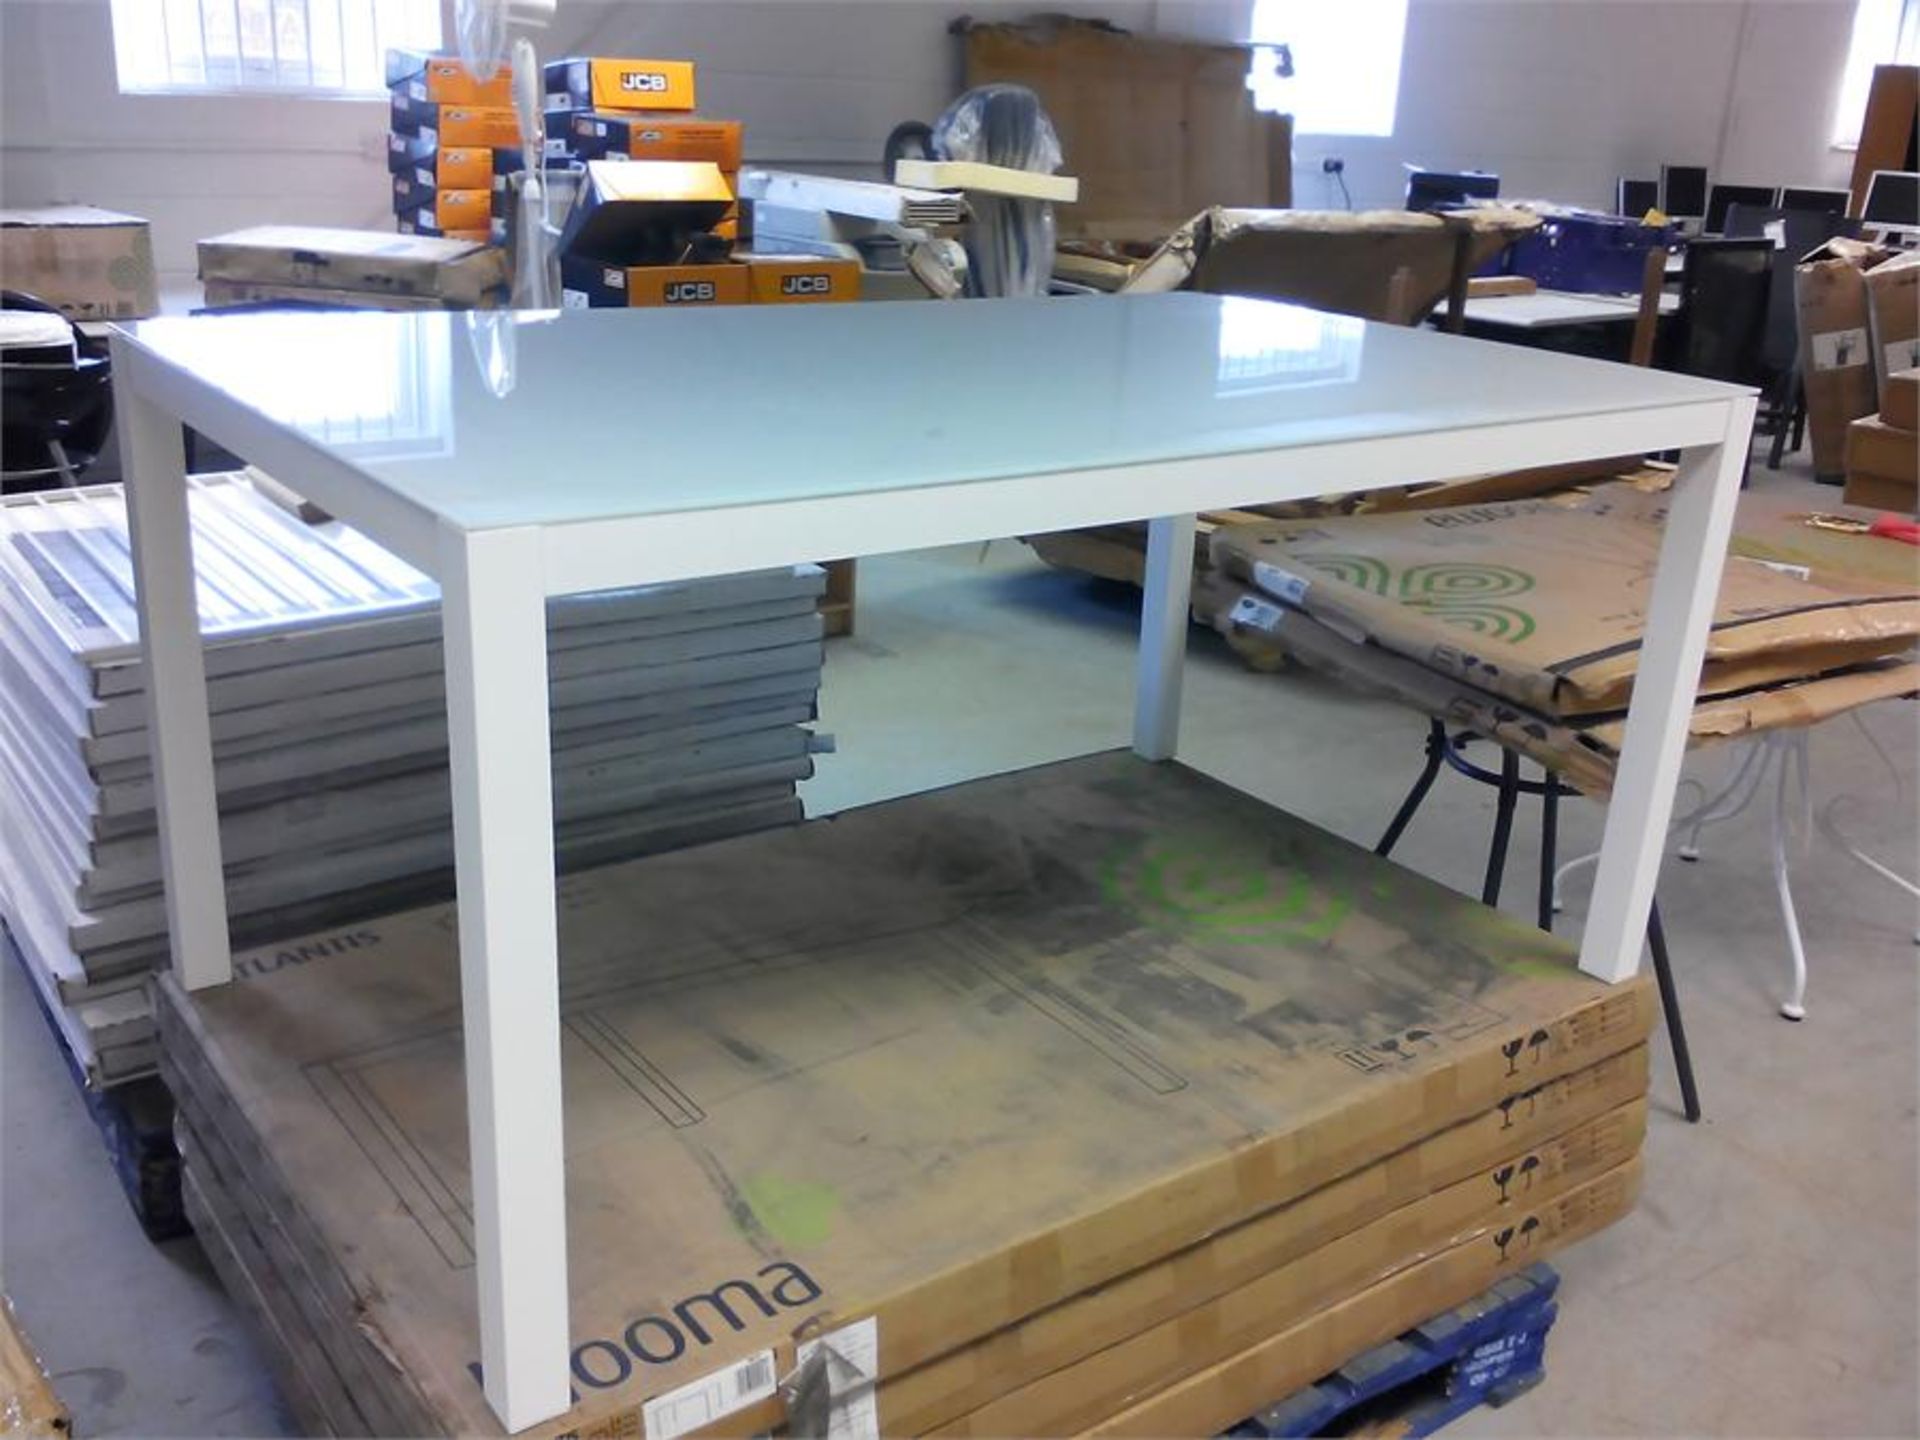 Blooma Atlantic table, powder coated aluminium with 5 mm tempered glass top - RRP £85